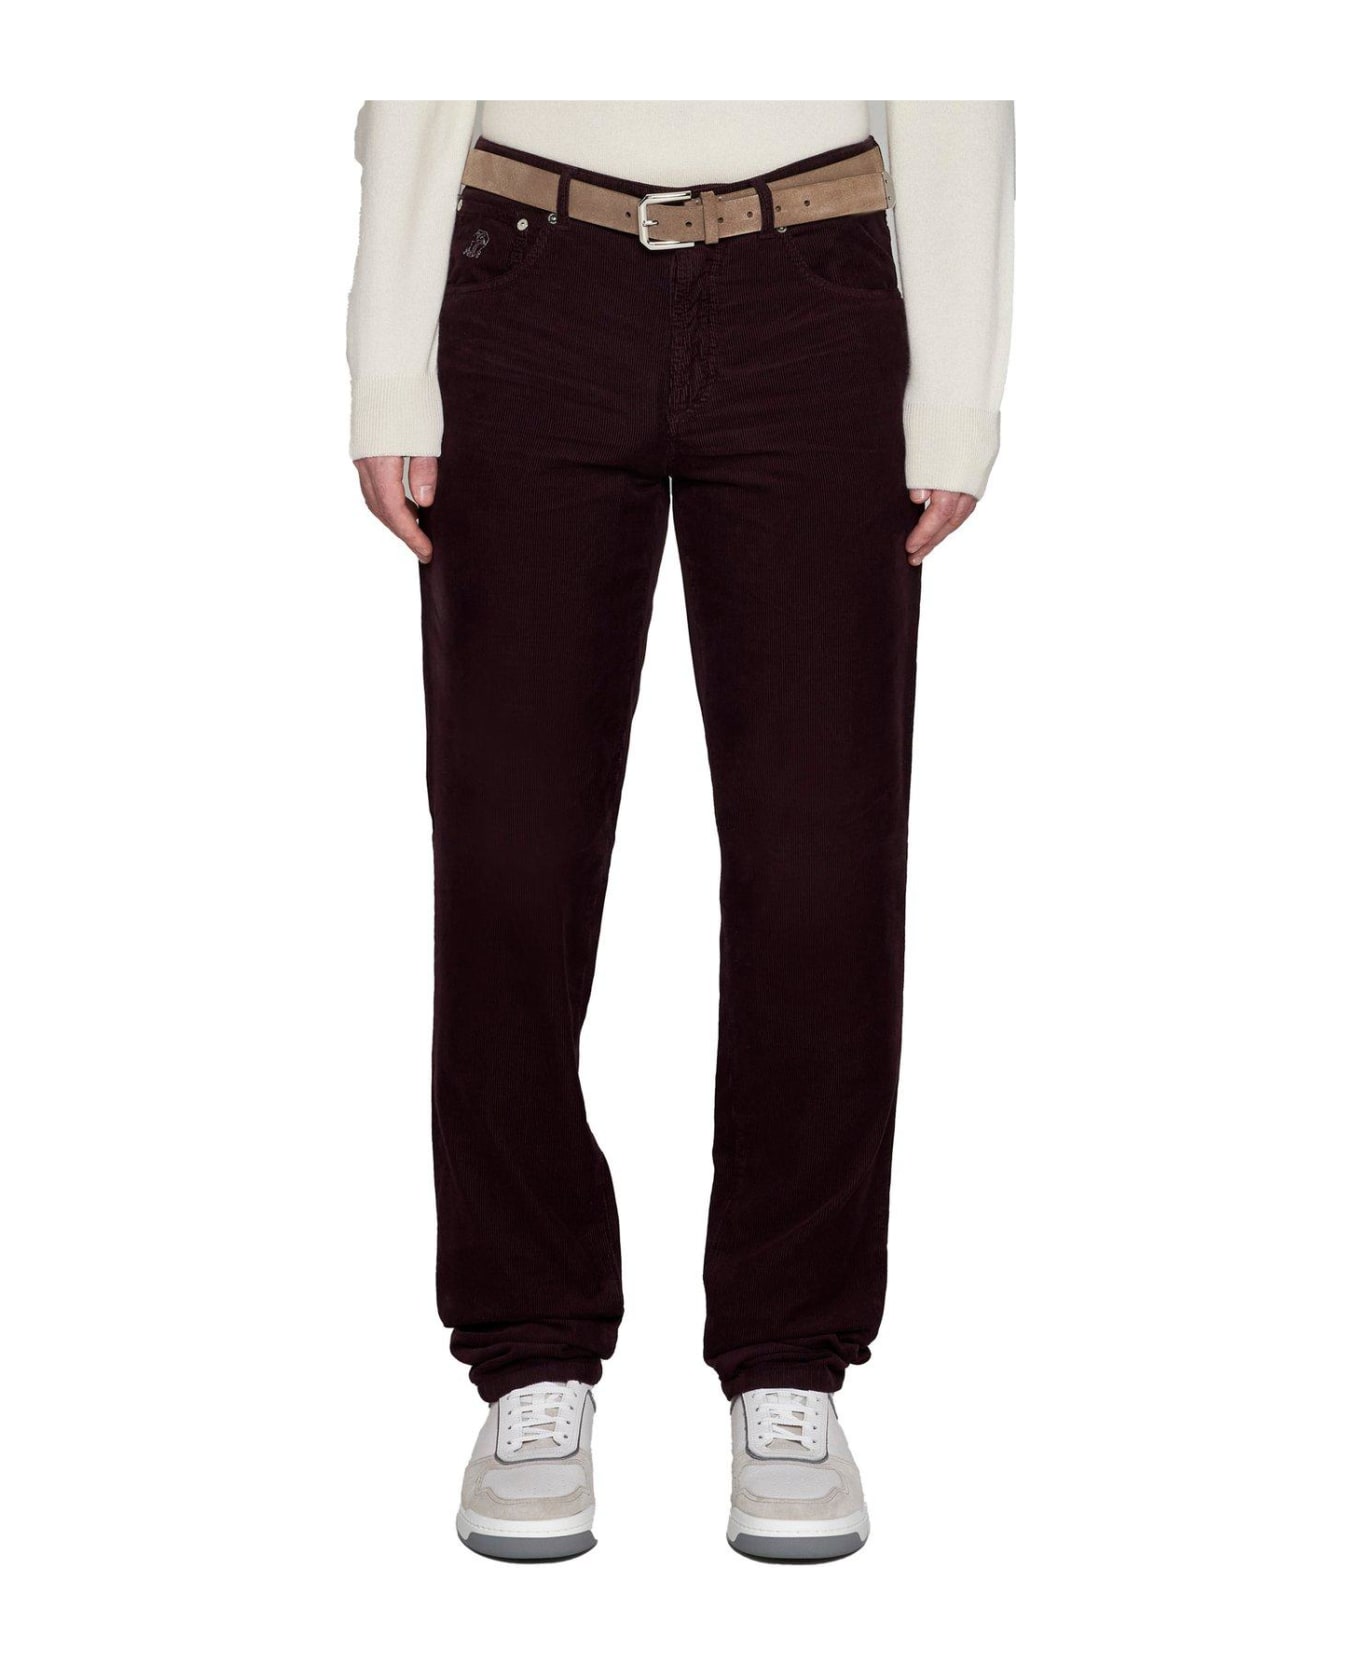 Brunello Cucinelli Logo Embroidered Cropped Corduroy Pants - Bordeaux